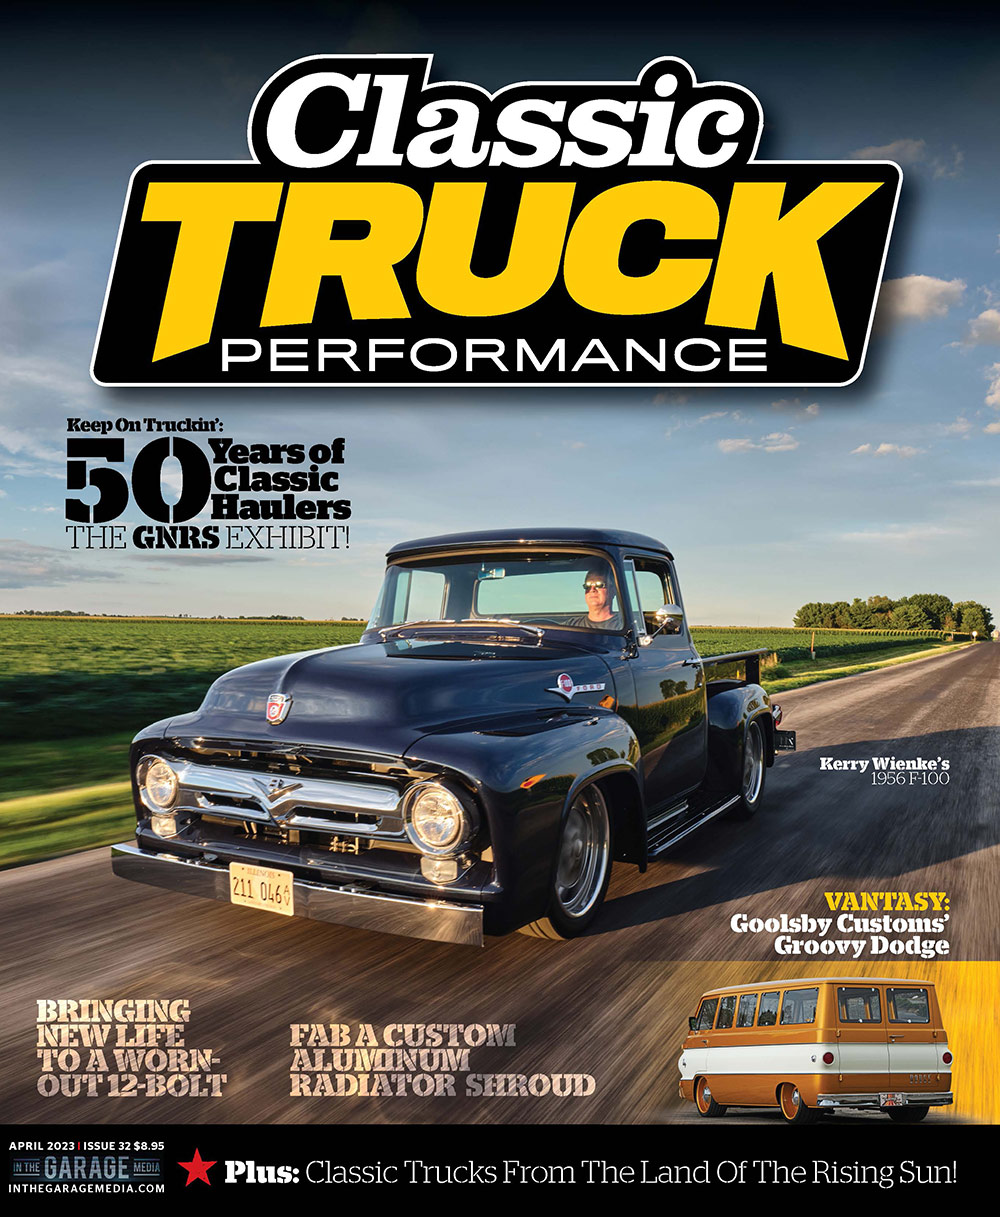 Classic Truck Performance April 2023 cover